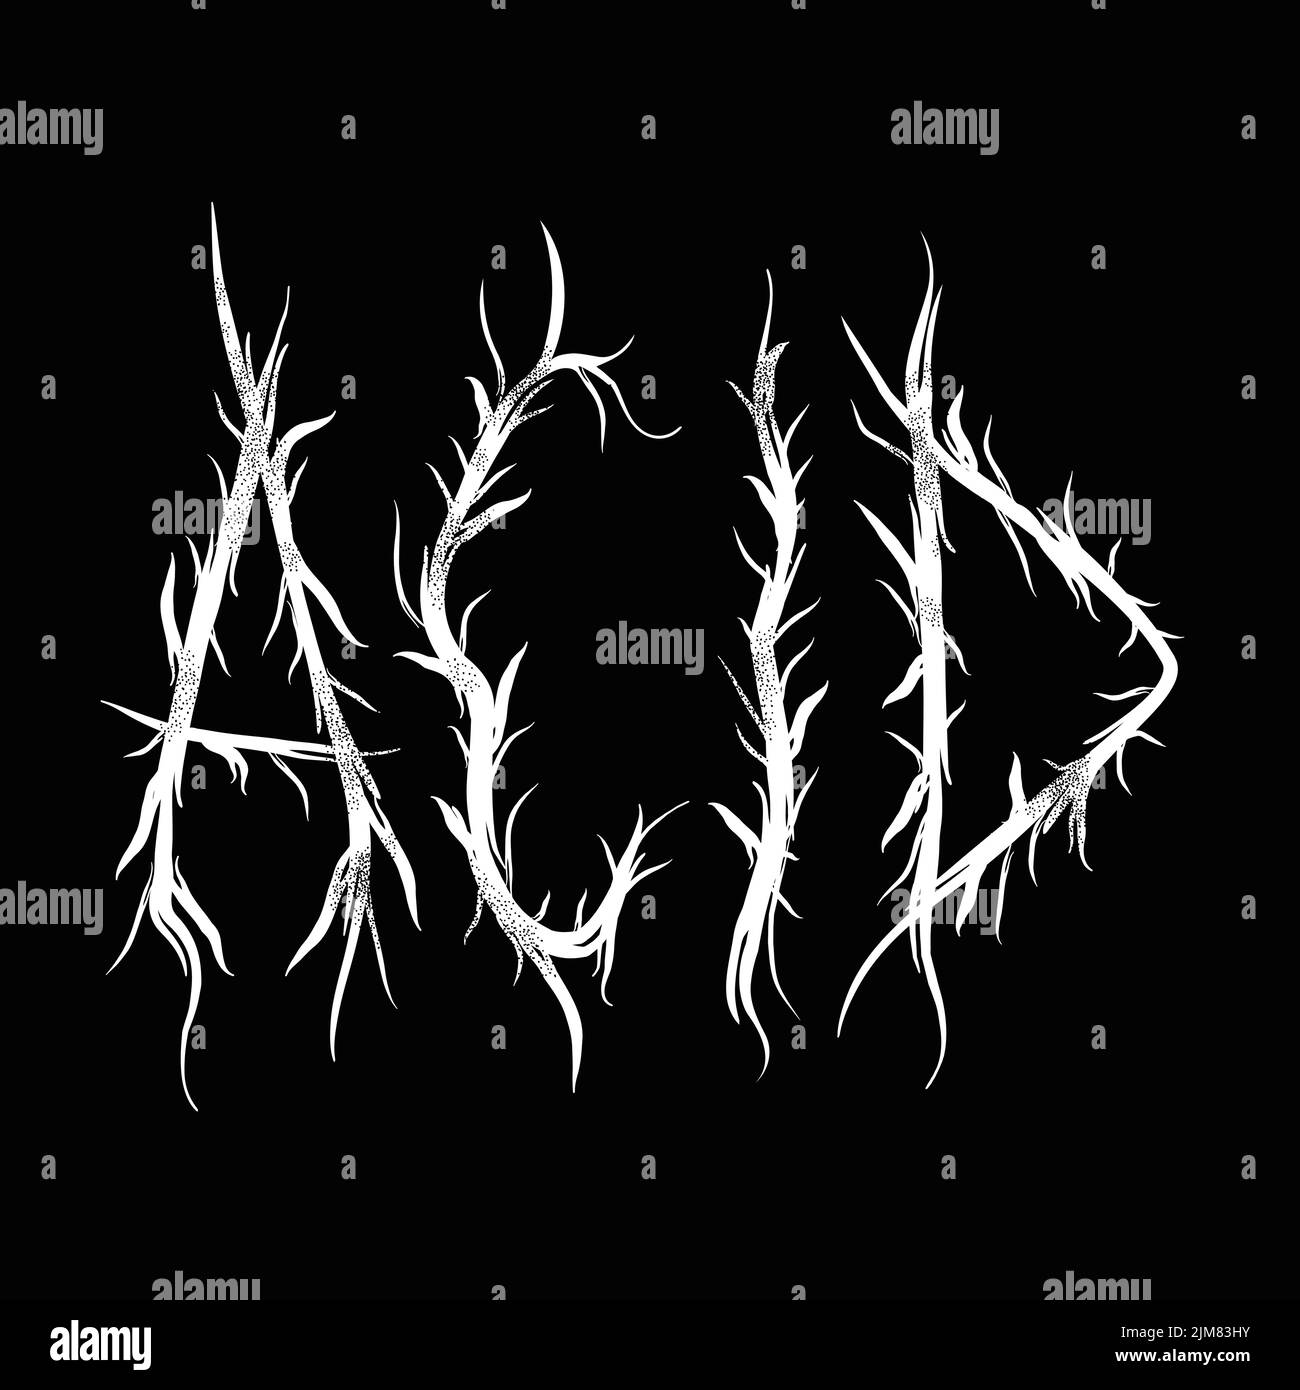 Acid word,trendy black metal style letters.Vector hand drawn illustration.Acid,trippy letters,fashion,black metal style print for t-shirt,poster concept Stock Vector